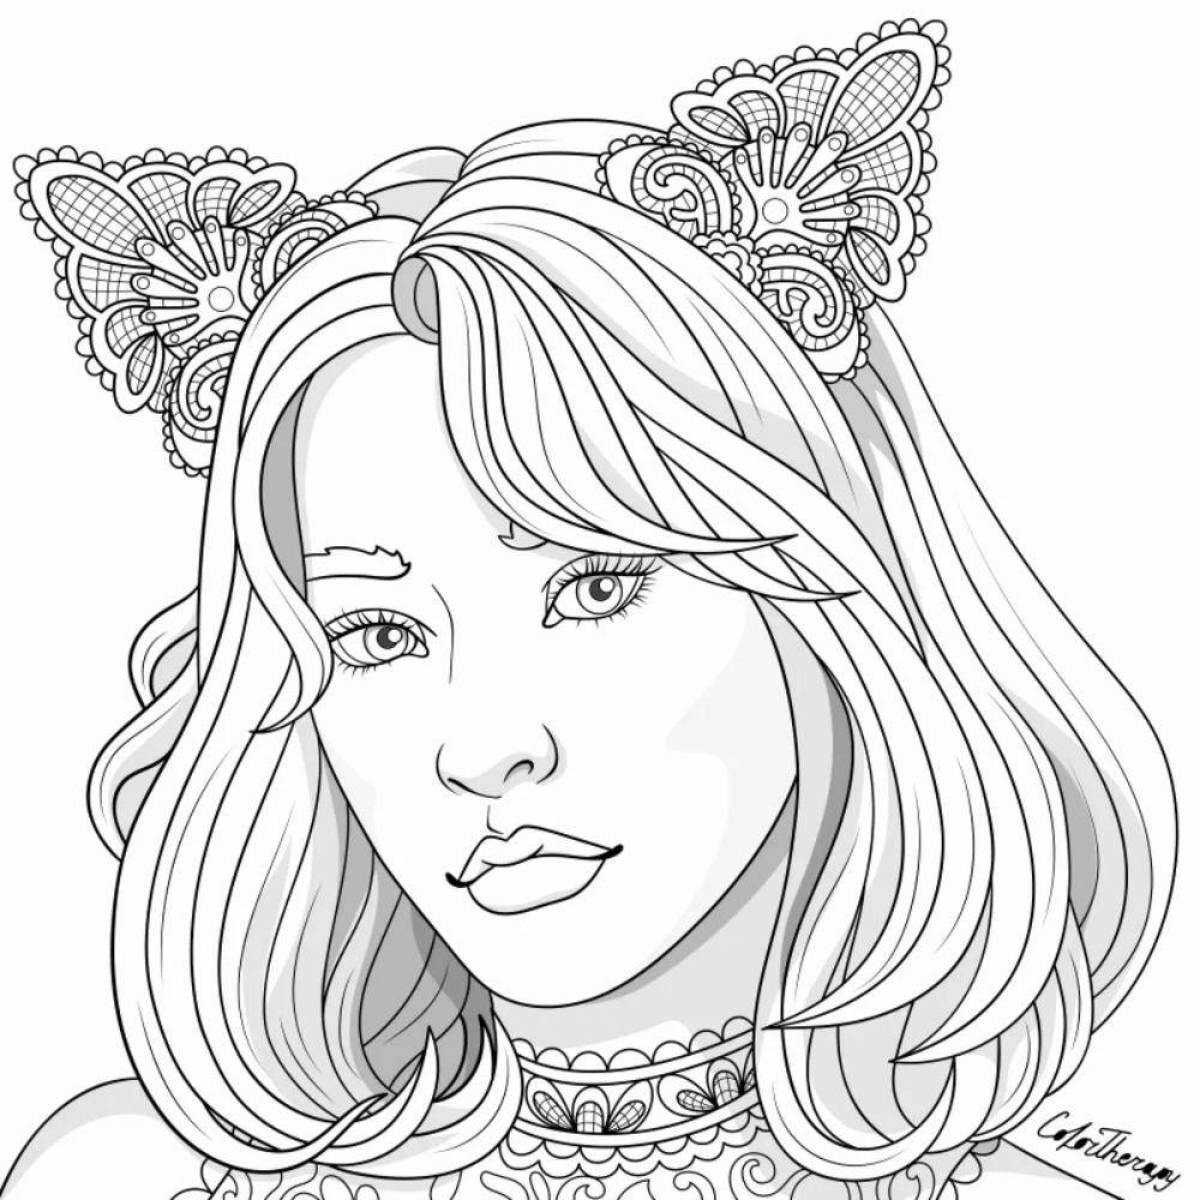 Adorable coloring book for girls full sheet